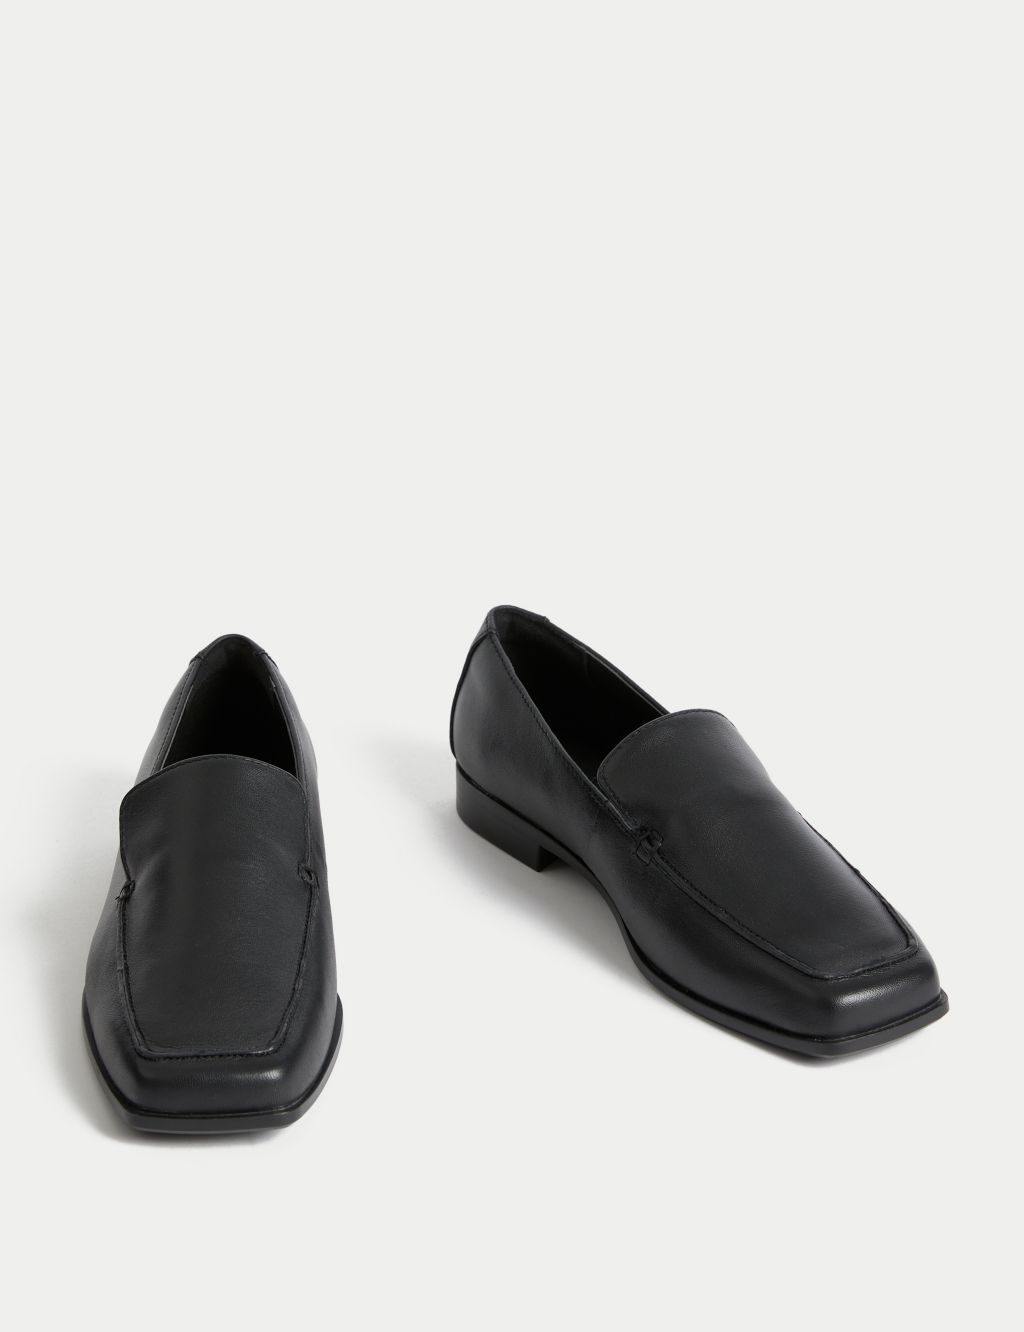 Wide Fit Leather Flat Loafers image 1